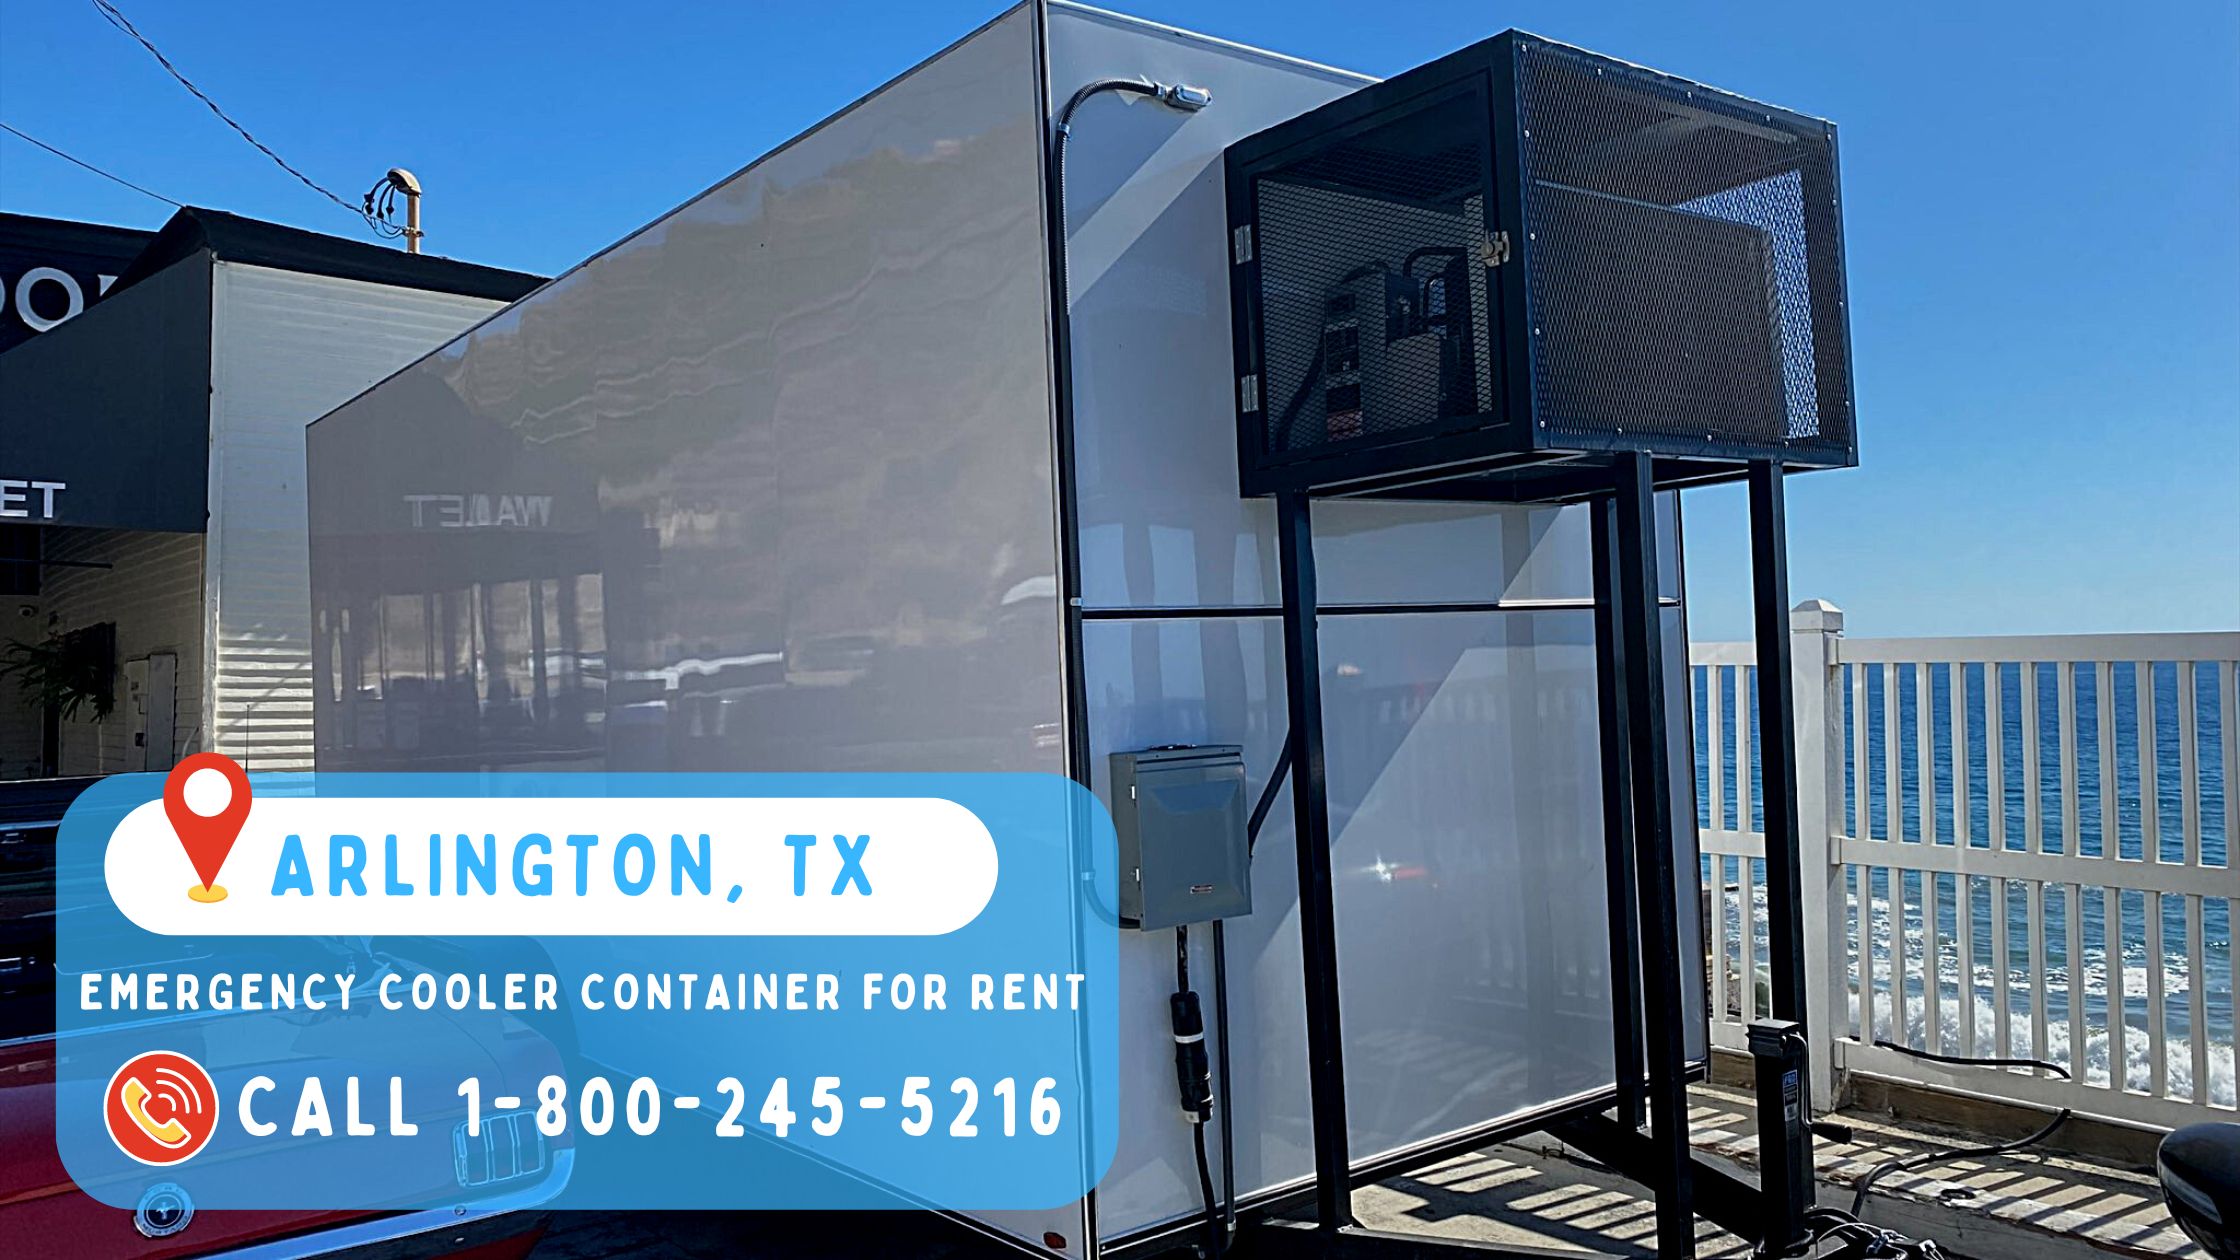 Emergency Cooler Container for Rent in Arlington